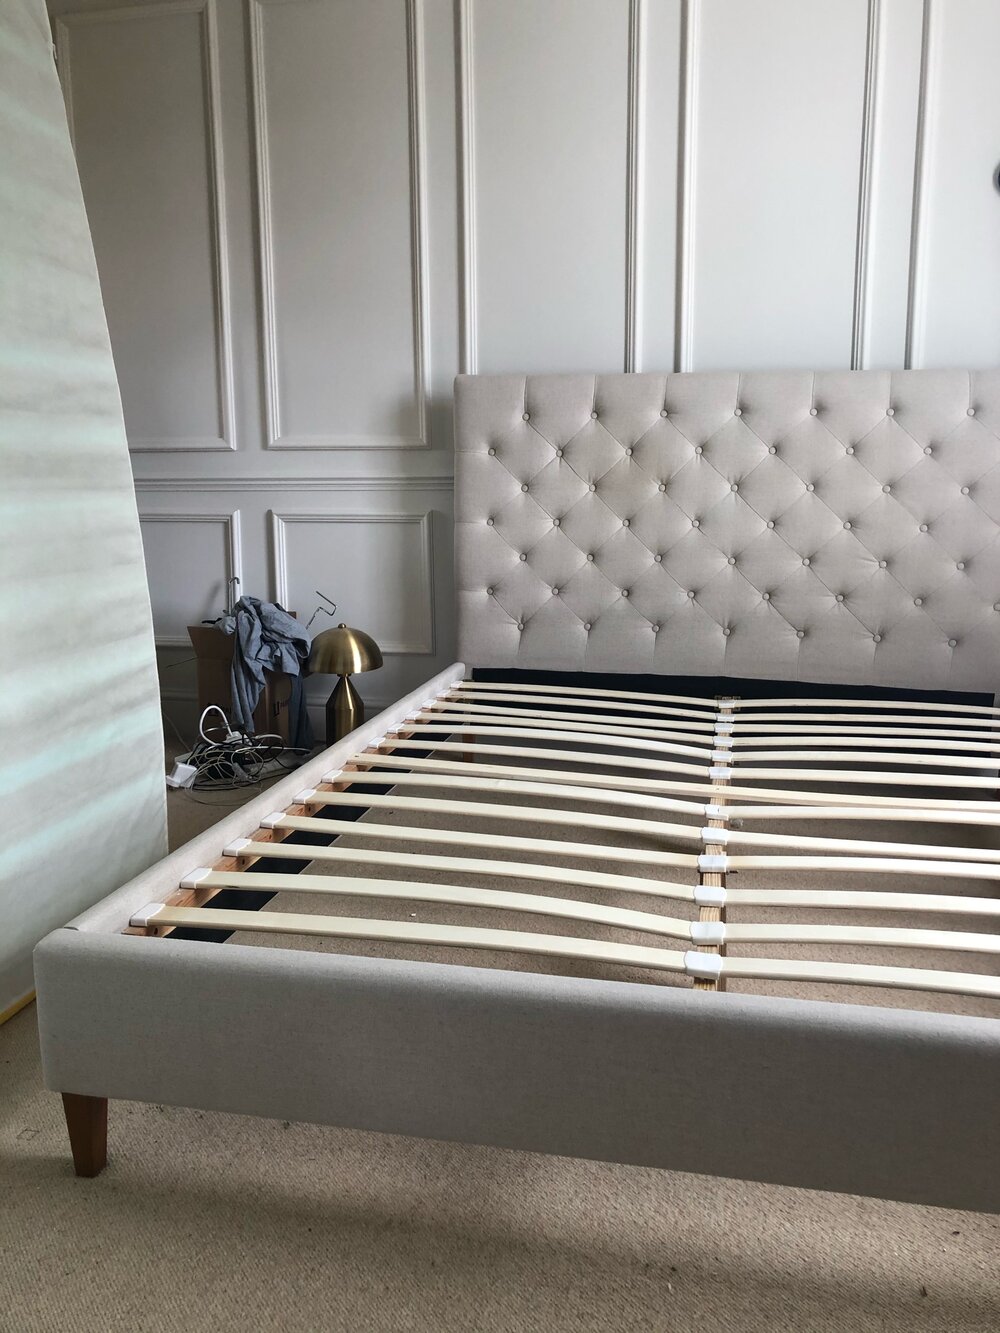 How To Reupholster A Bed The Diy That, How To Cover A Bed Frame With Fabric